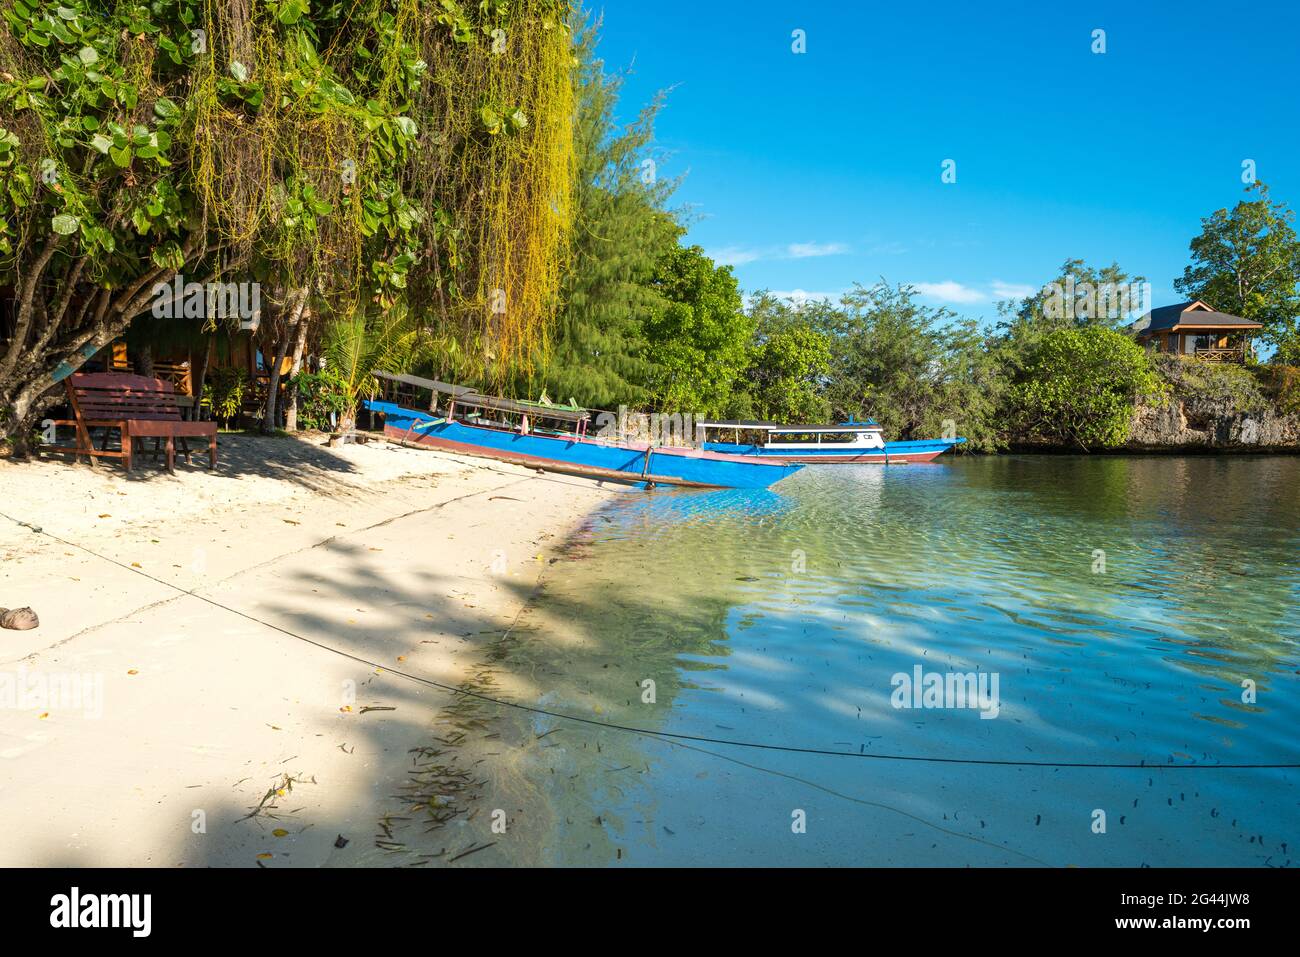 Boats on the beach of the small island of Poyalisa which is part of the Togian archipelago, Sulawesi Stock Photo